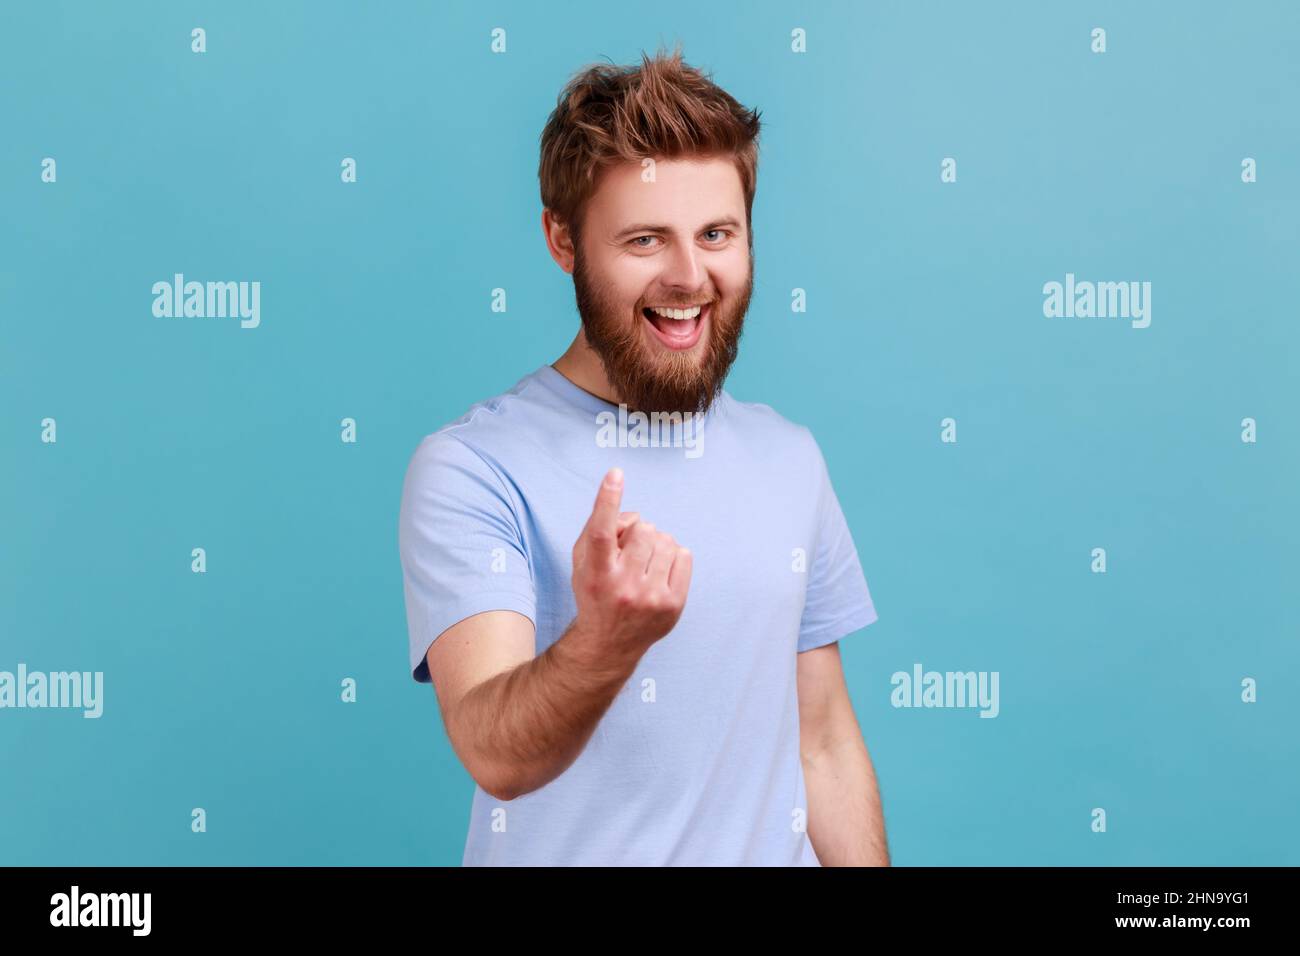 Come here. Portrait of bearded man making beckoning gesture, inviting to come, flirting and looking playful, having excited facial expression. Indoor studio shot isolated on blue background. Stock Photo